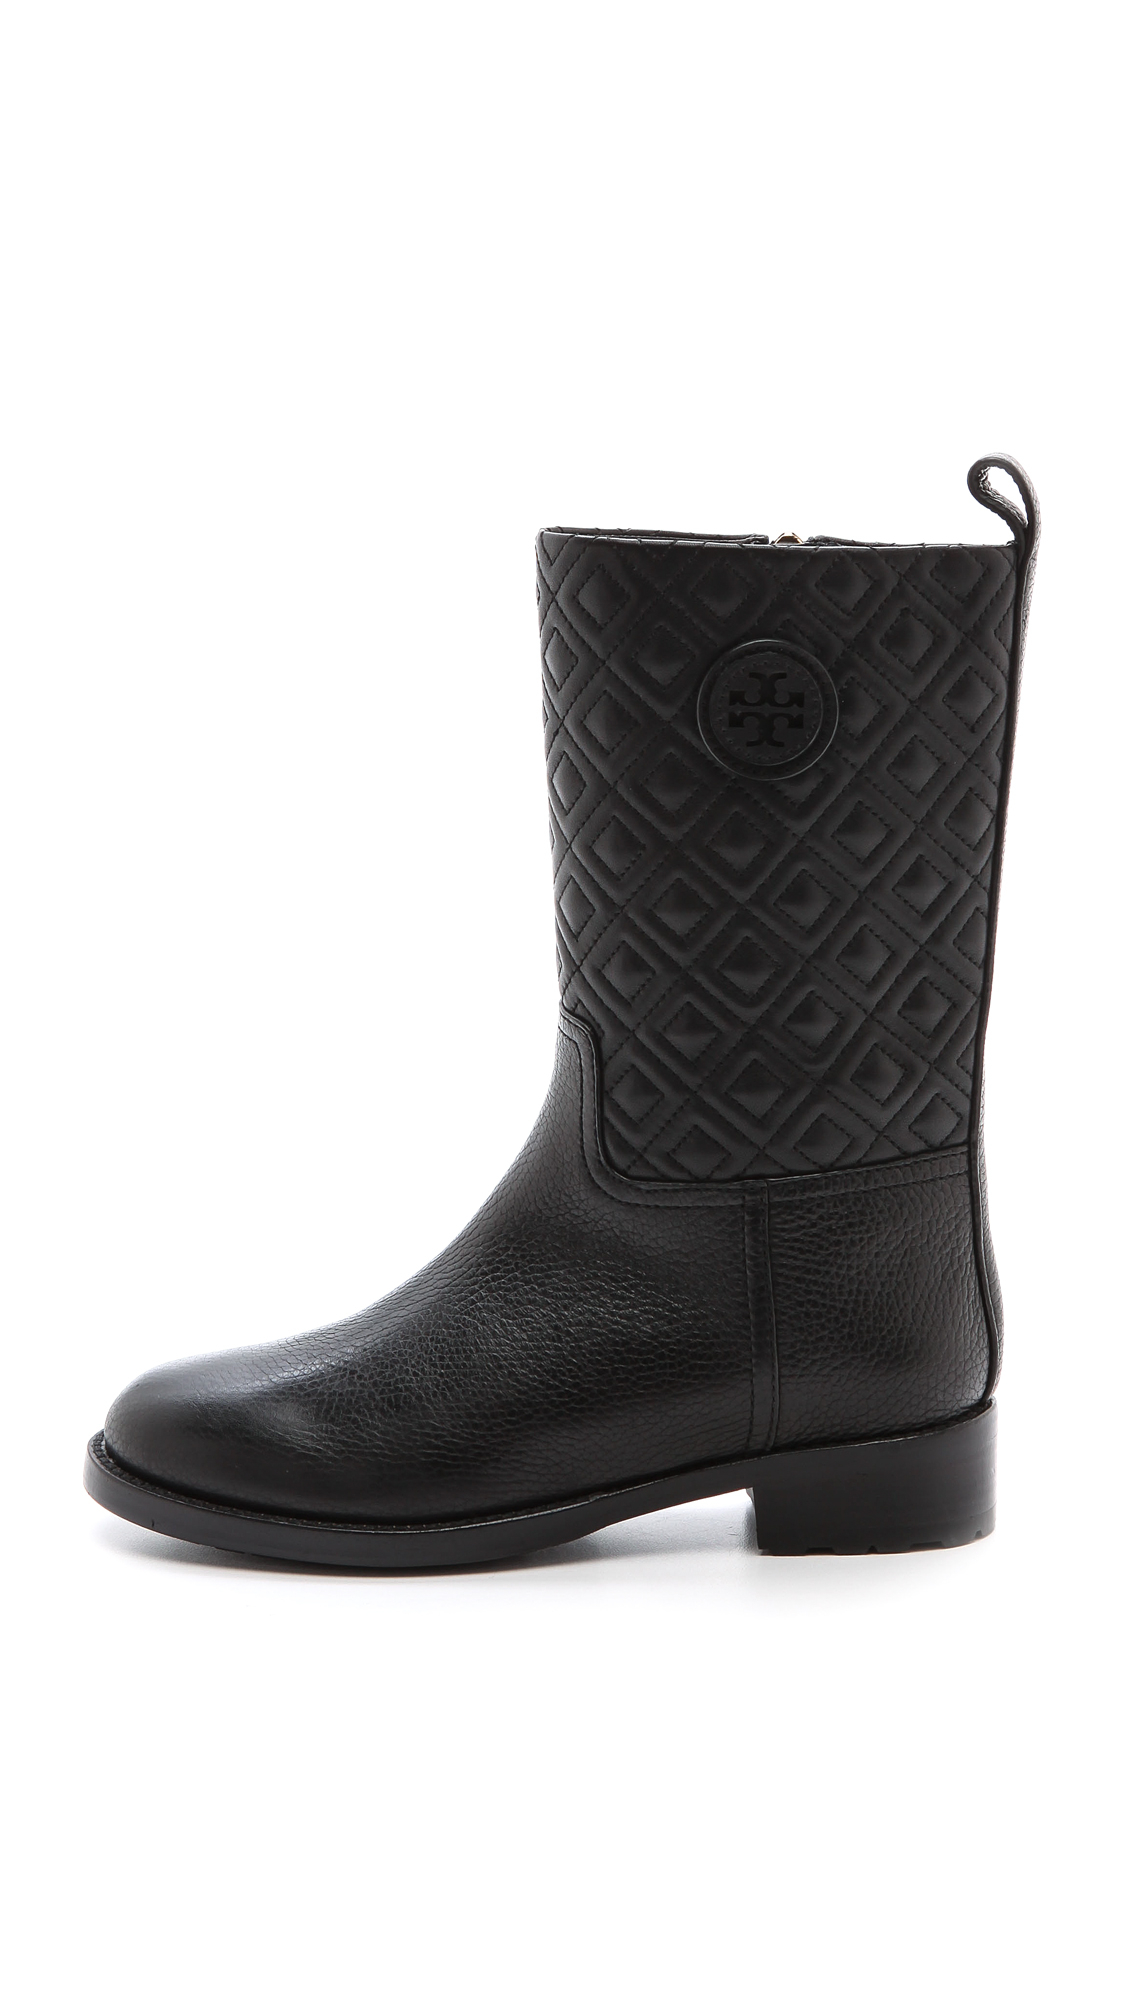 Lyst - Tory Burch Marion Quilted Booties Black in Black